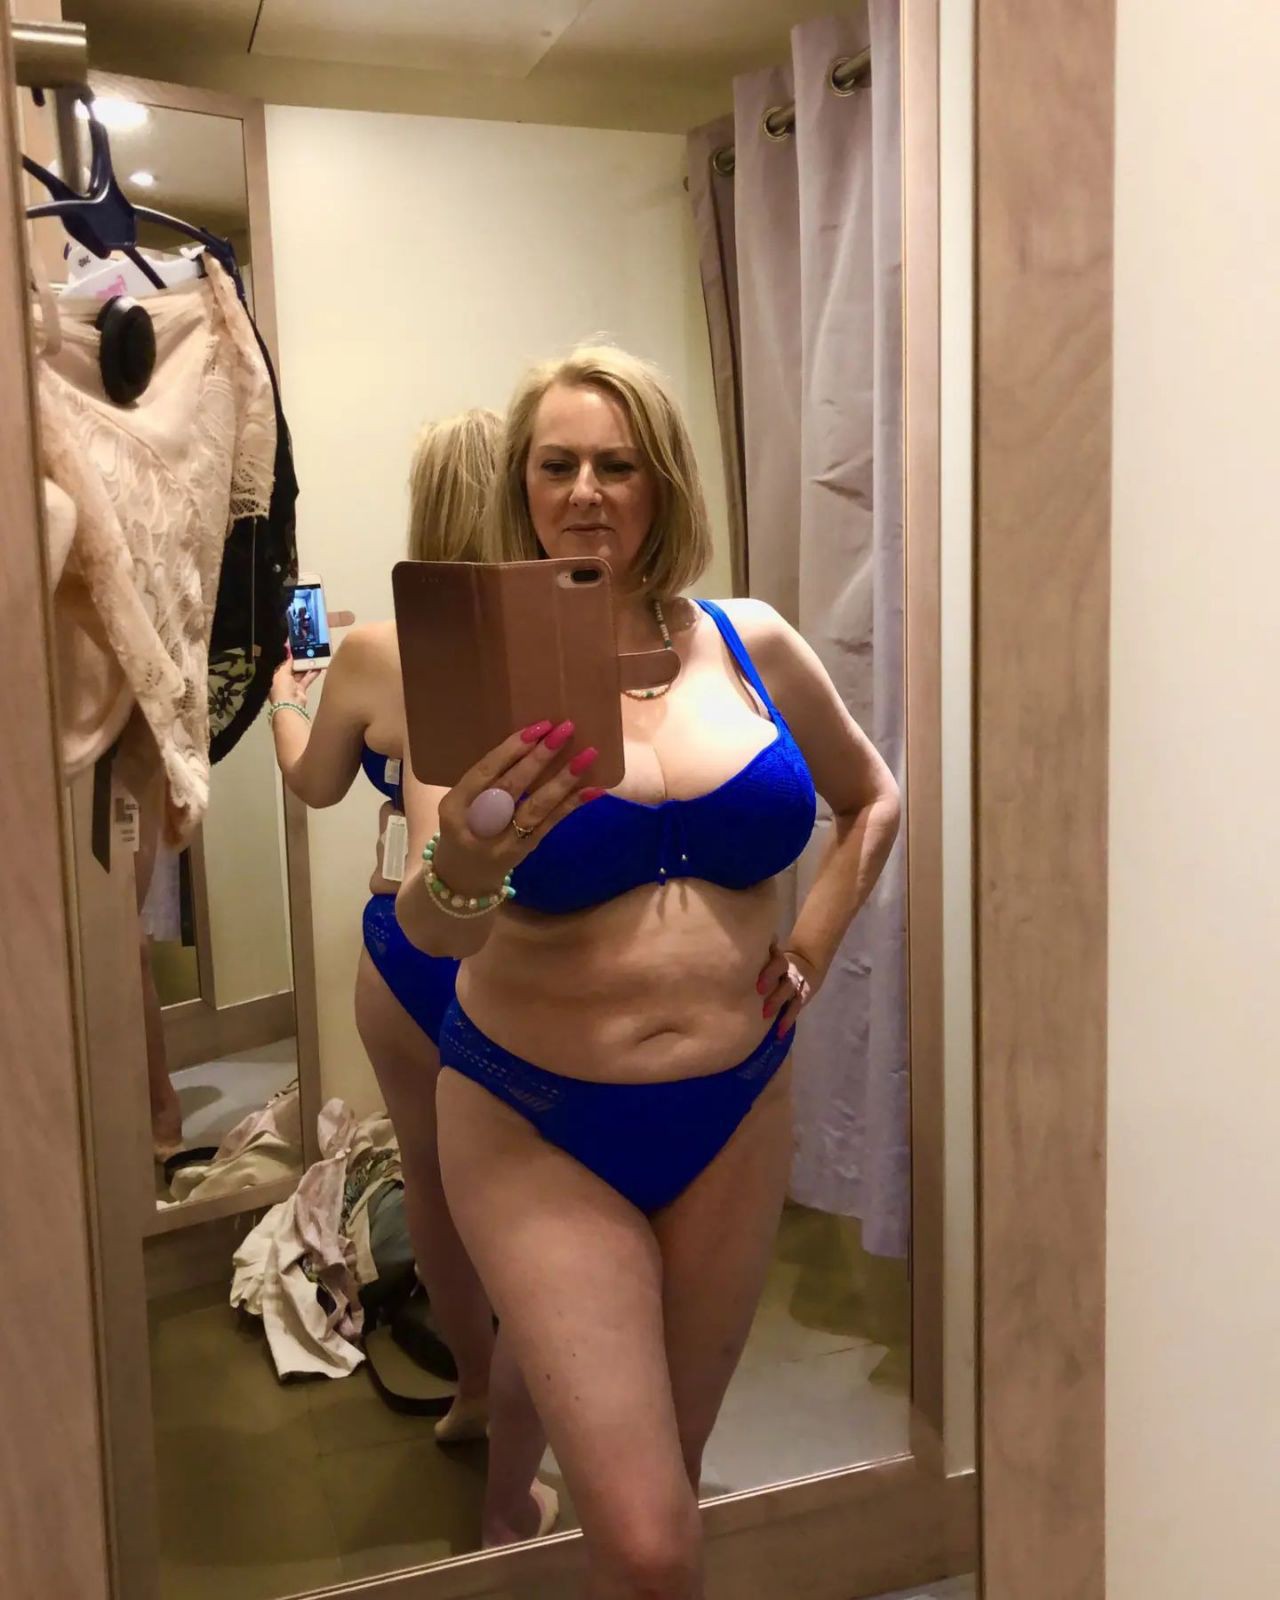 49 OLD, HOT AND SEXY EXPERIENCE MATURE WOMAN AVAILABLE FOR HOOKING UP 